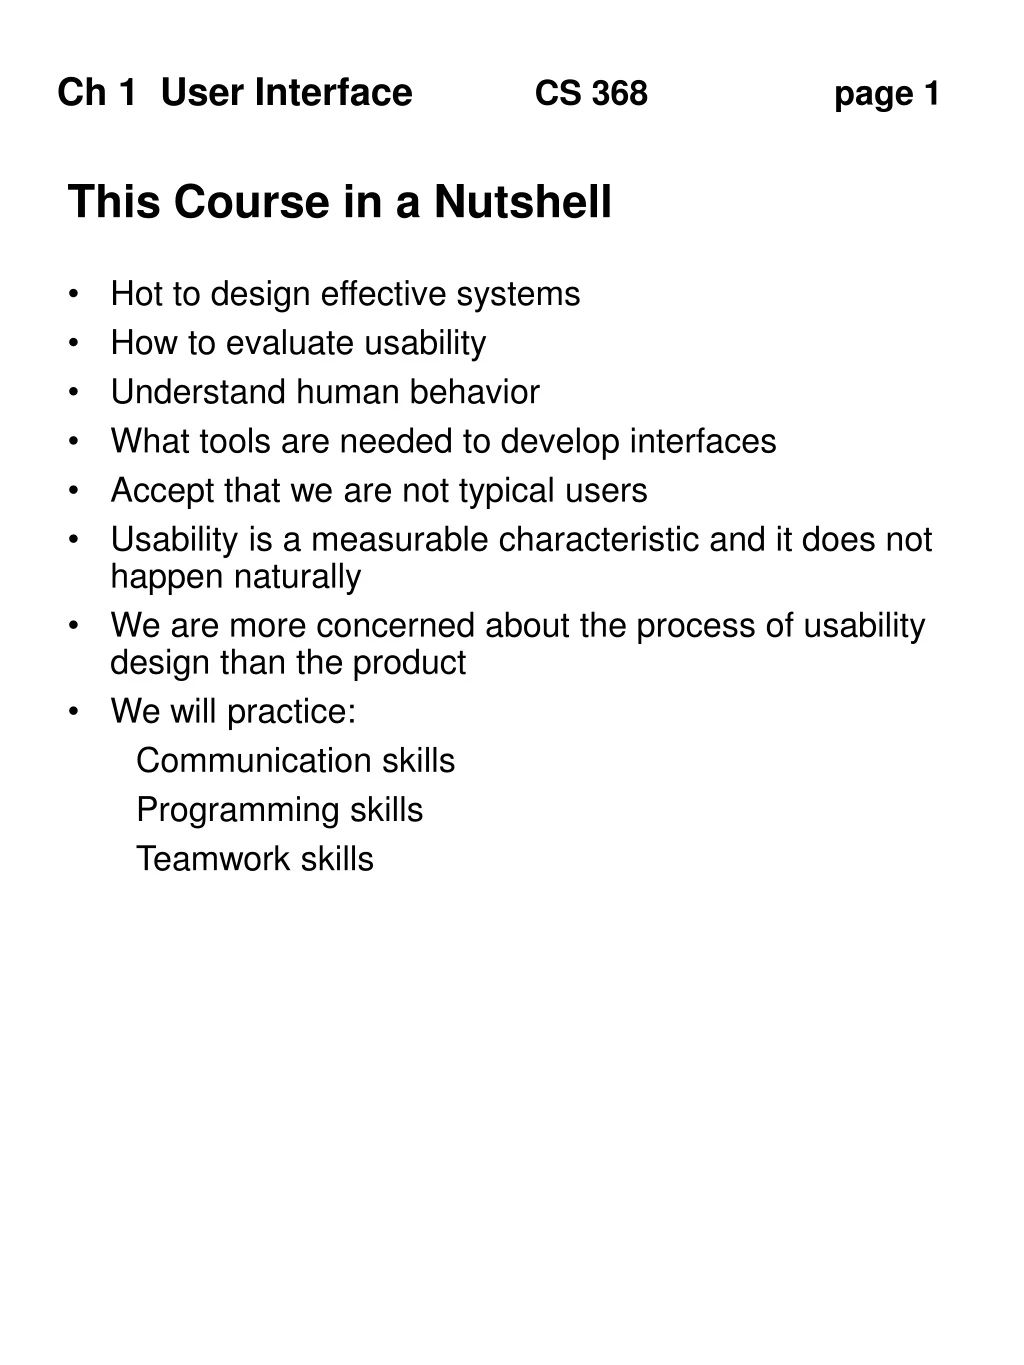 this course in a nutshell